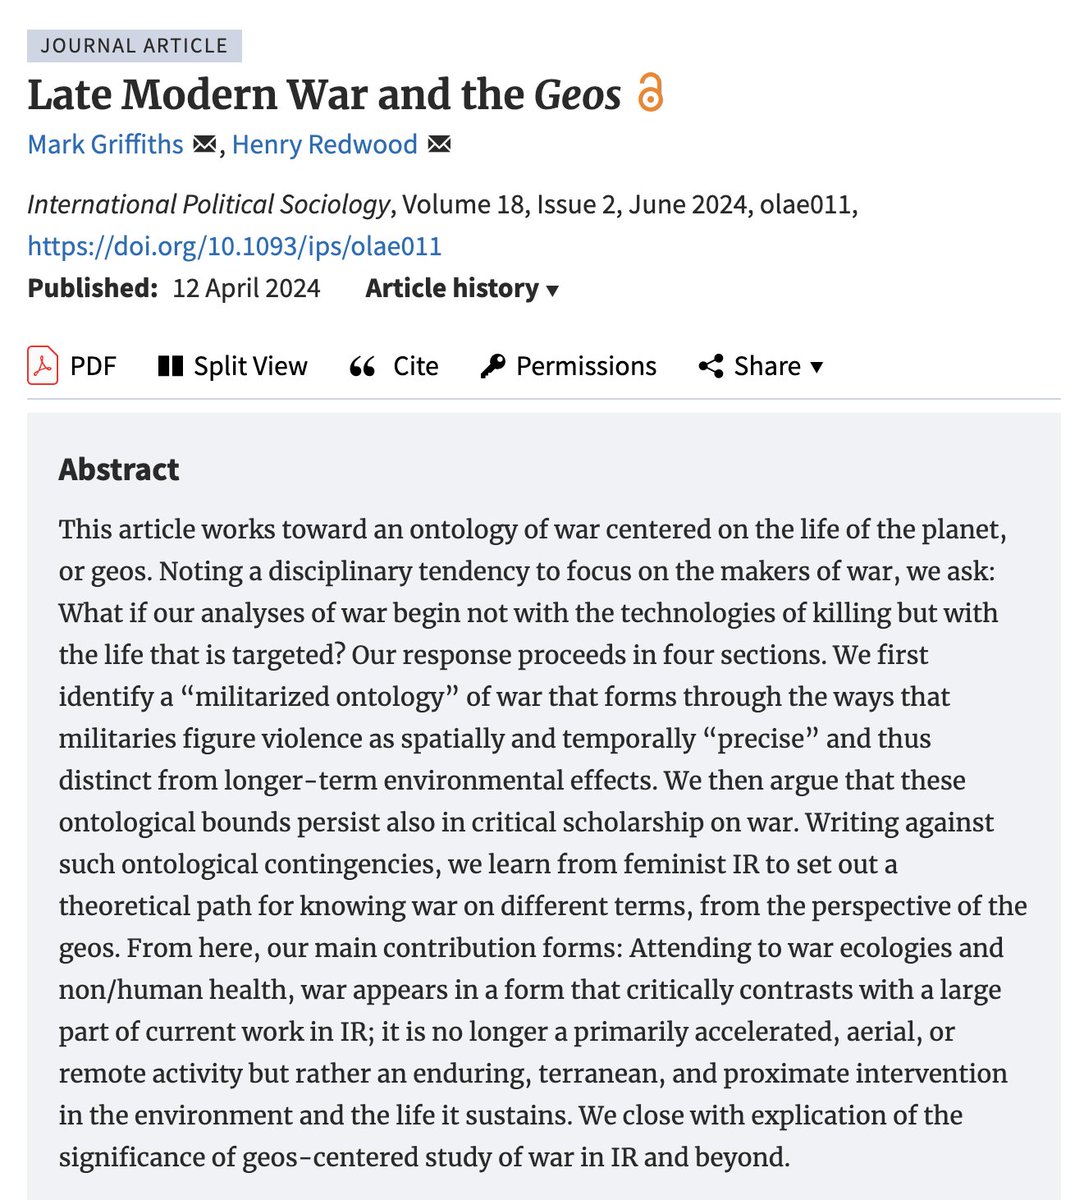 📚 What if our analyses of war begin not with the technologies of killing but with the life that is targeted? Dr Henry Redwood co-published this journal article working toward an ontology of war centred on the life of the planet, or geos. Explore it ⬇️ academic.oup.com/ips/article/18…